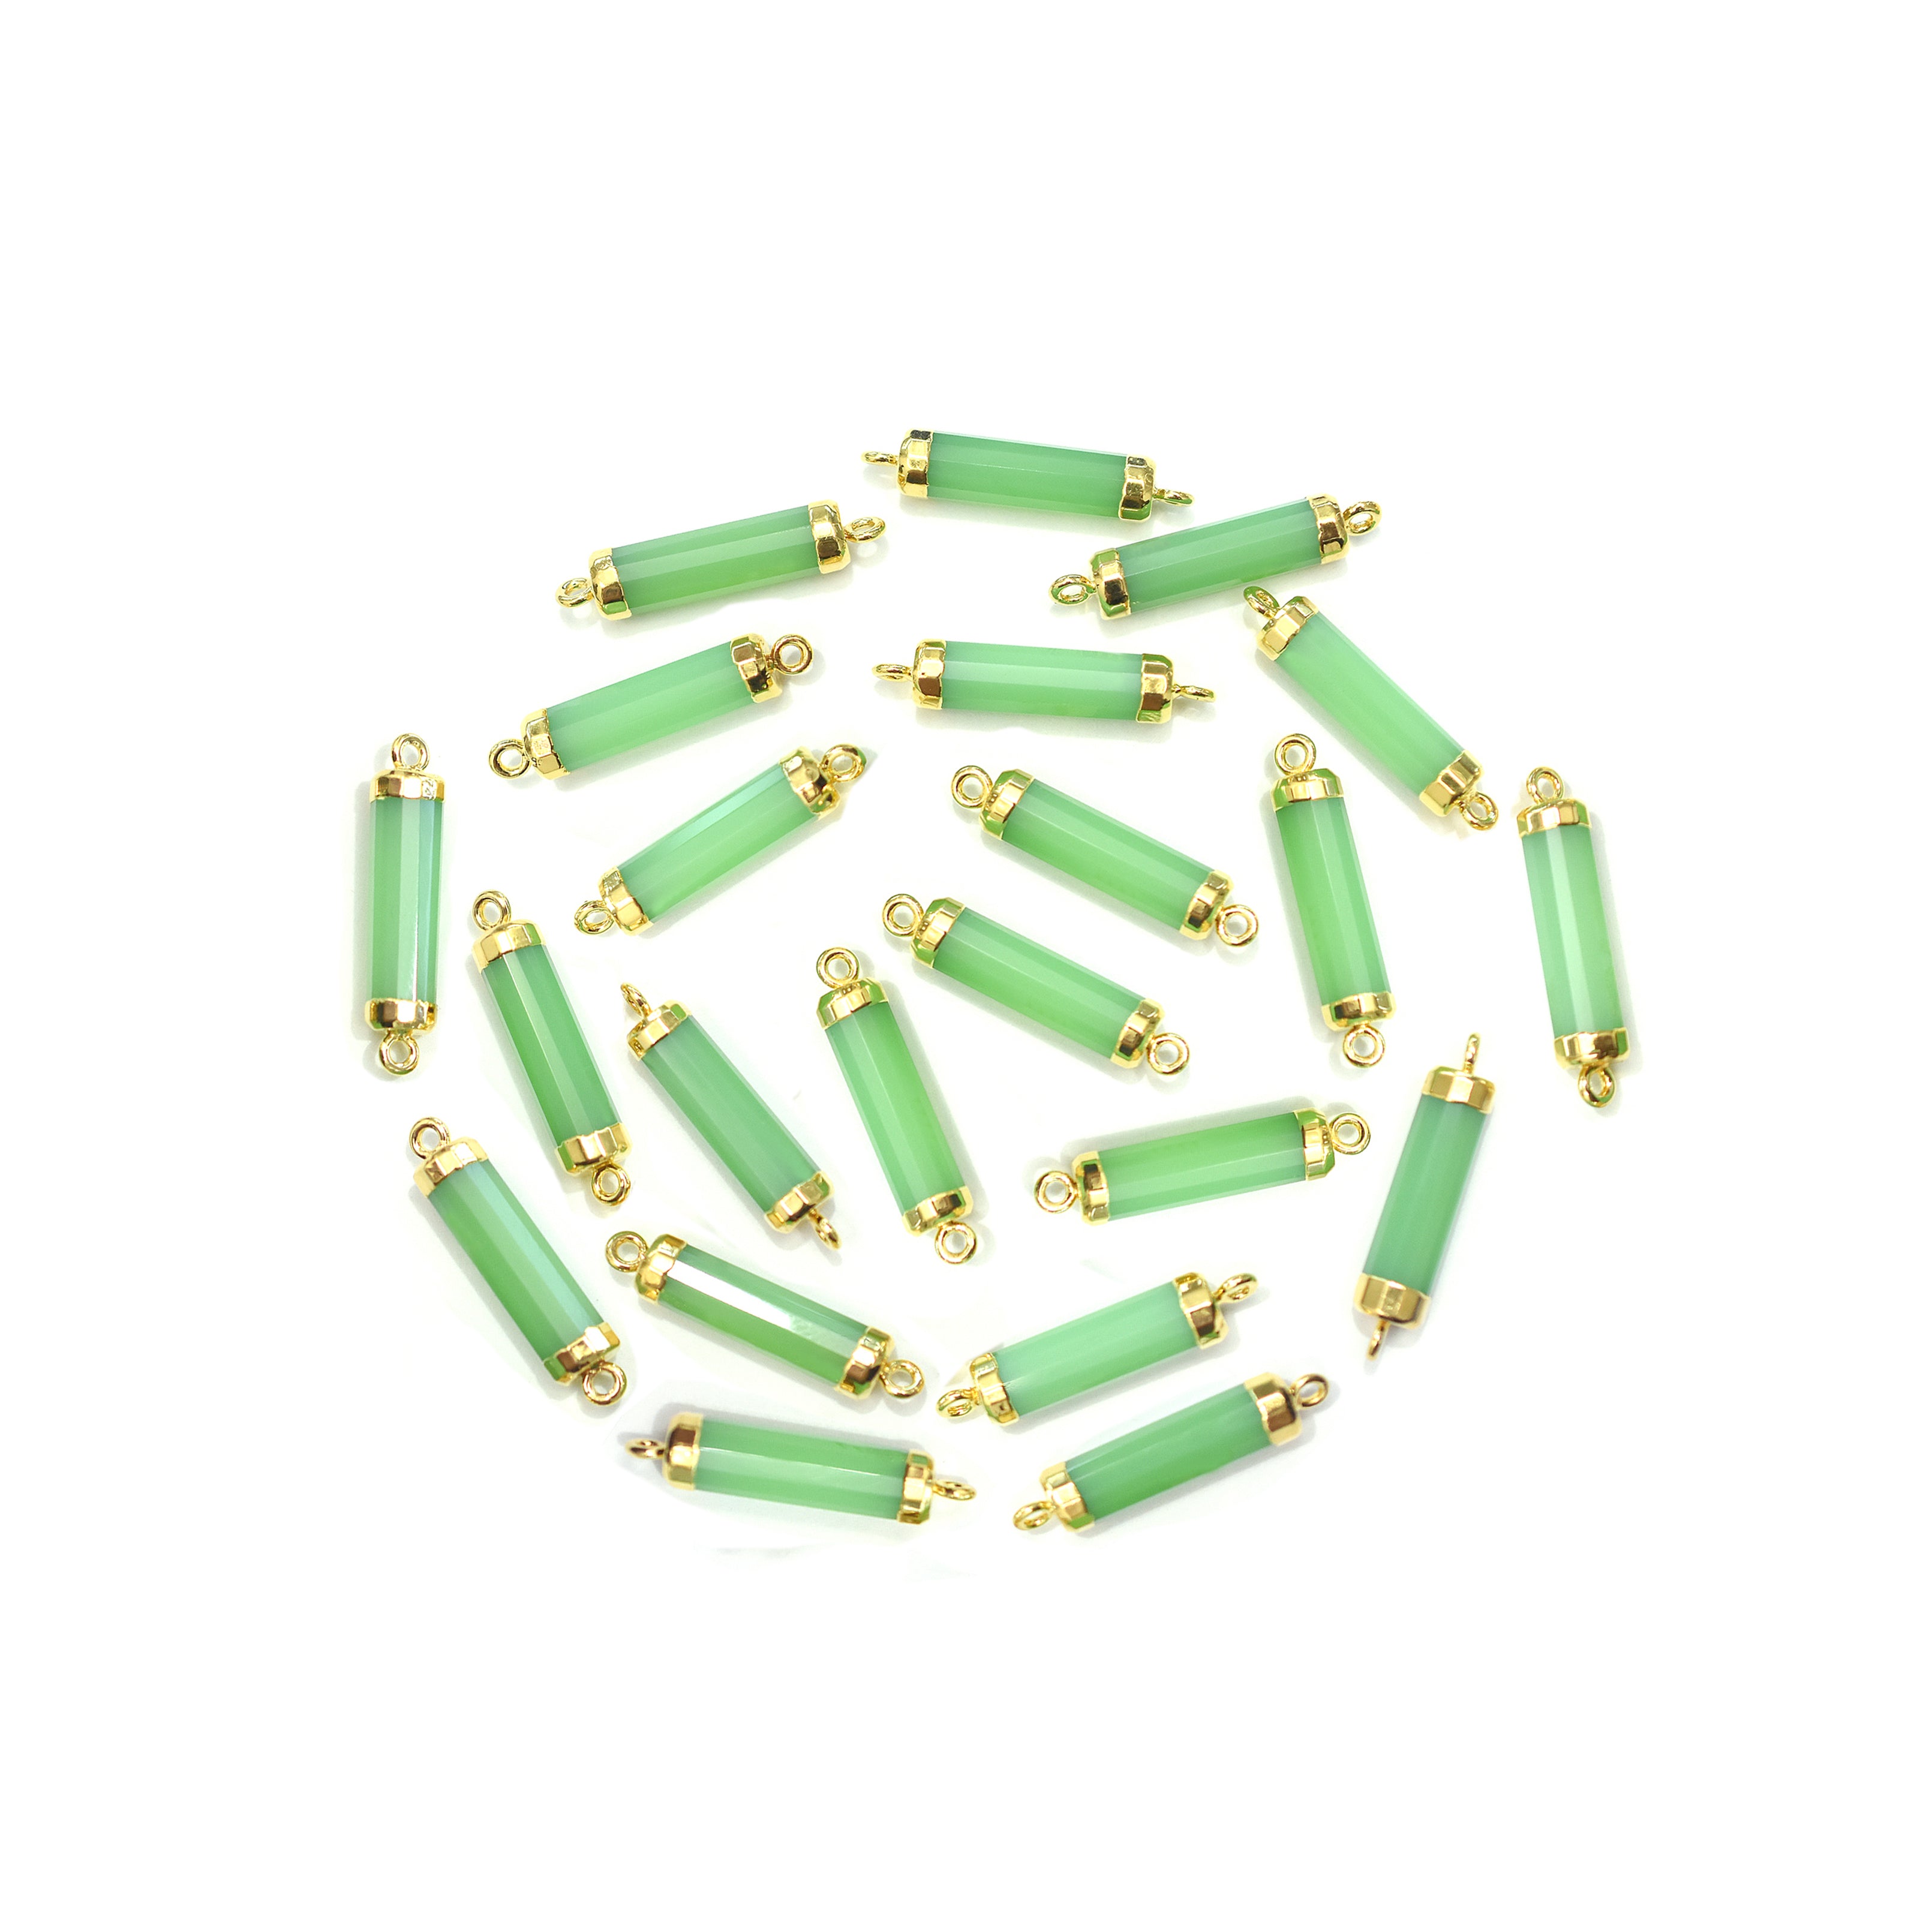 Chrysoprase Chalcedony 20X5 MM Barrel Shape Gold Electroplated Connector - Jaipur Gem Factory